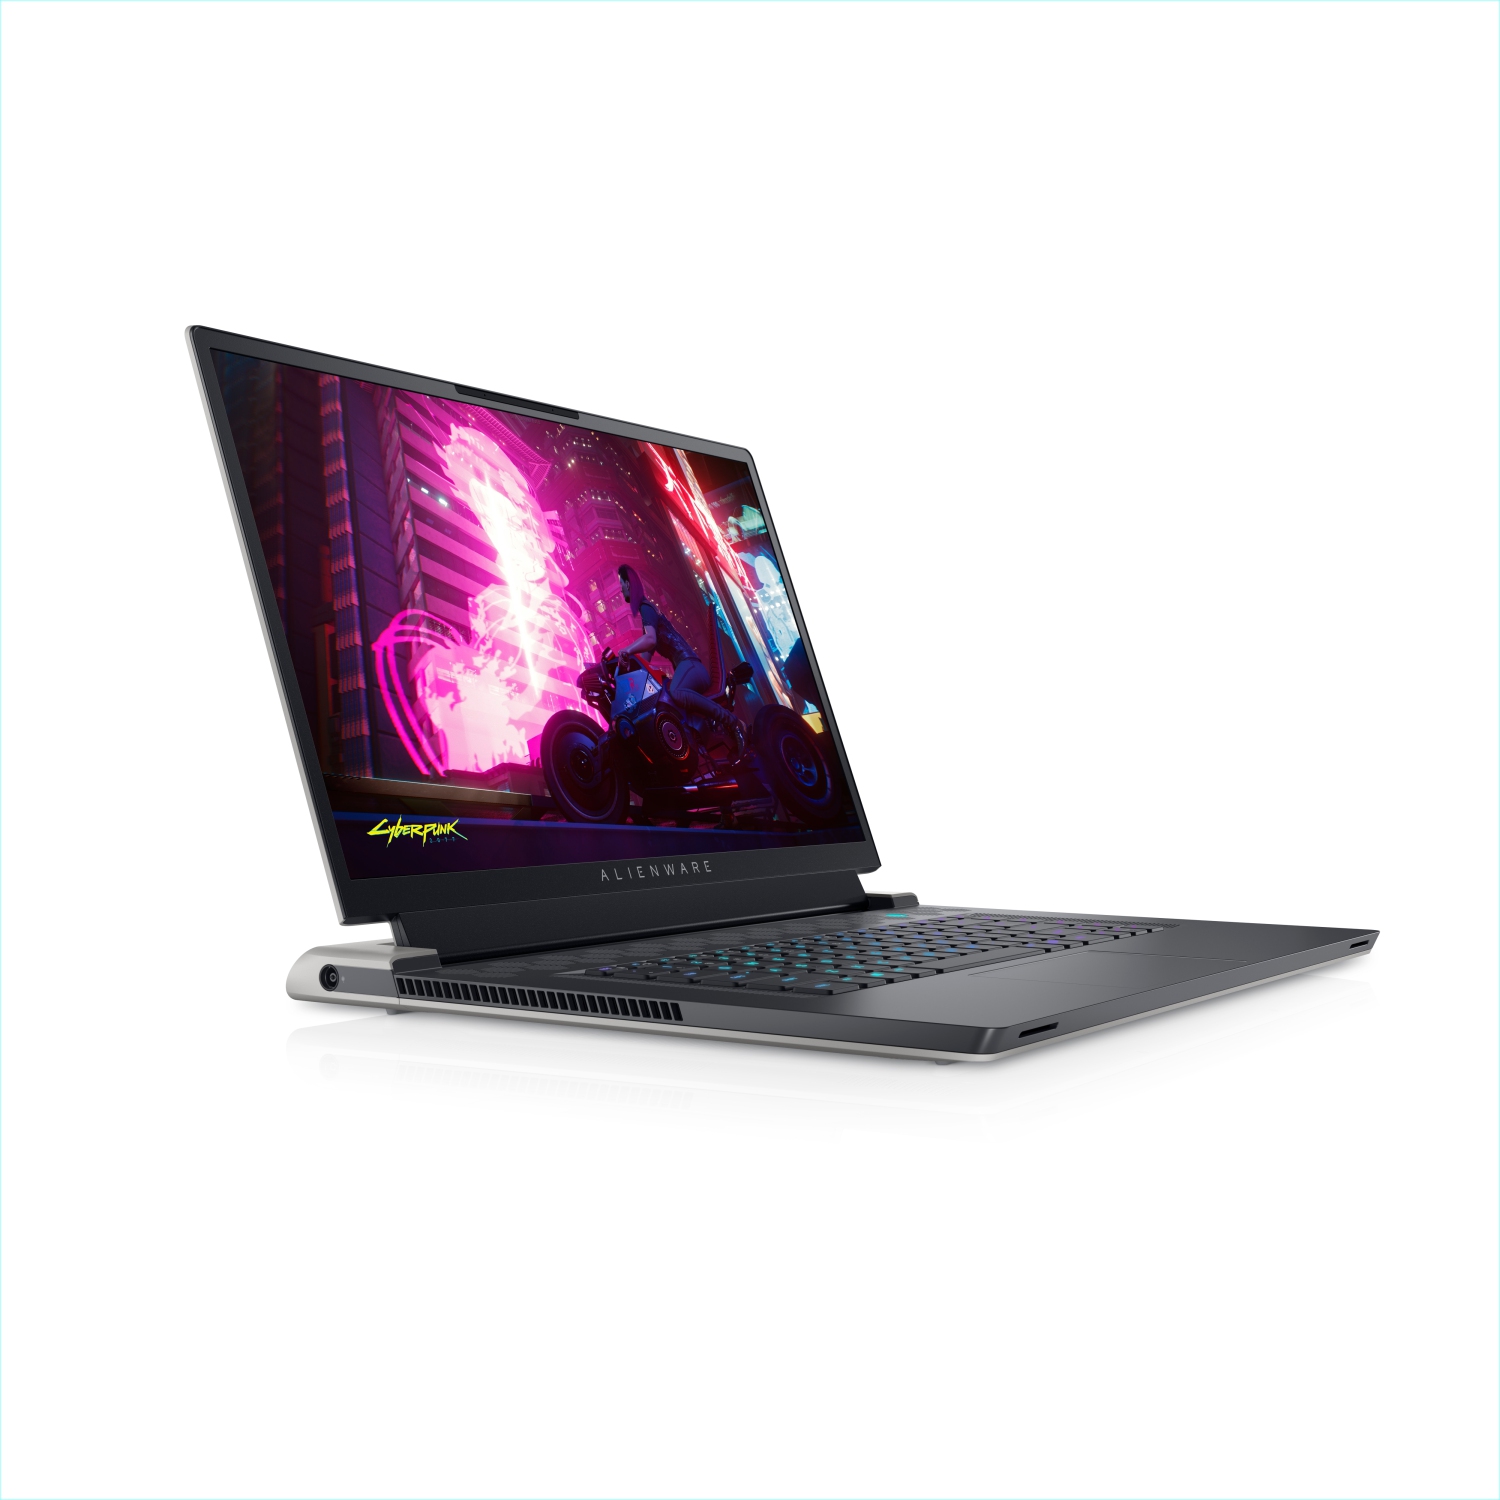 Refurbished (Excellent) - Dell Alienware X17 R1 Gaming Laptop (2021), 17.3" FHD, Core i7, 256GB SSD, 16GB RAM, RTX 3070, 8 Cores @ 4.6 GHz, 11th Gen CPU Certified